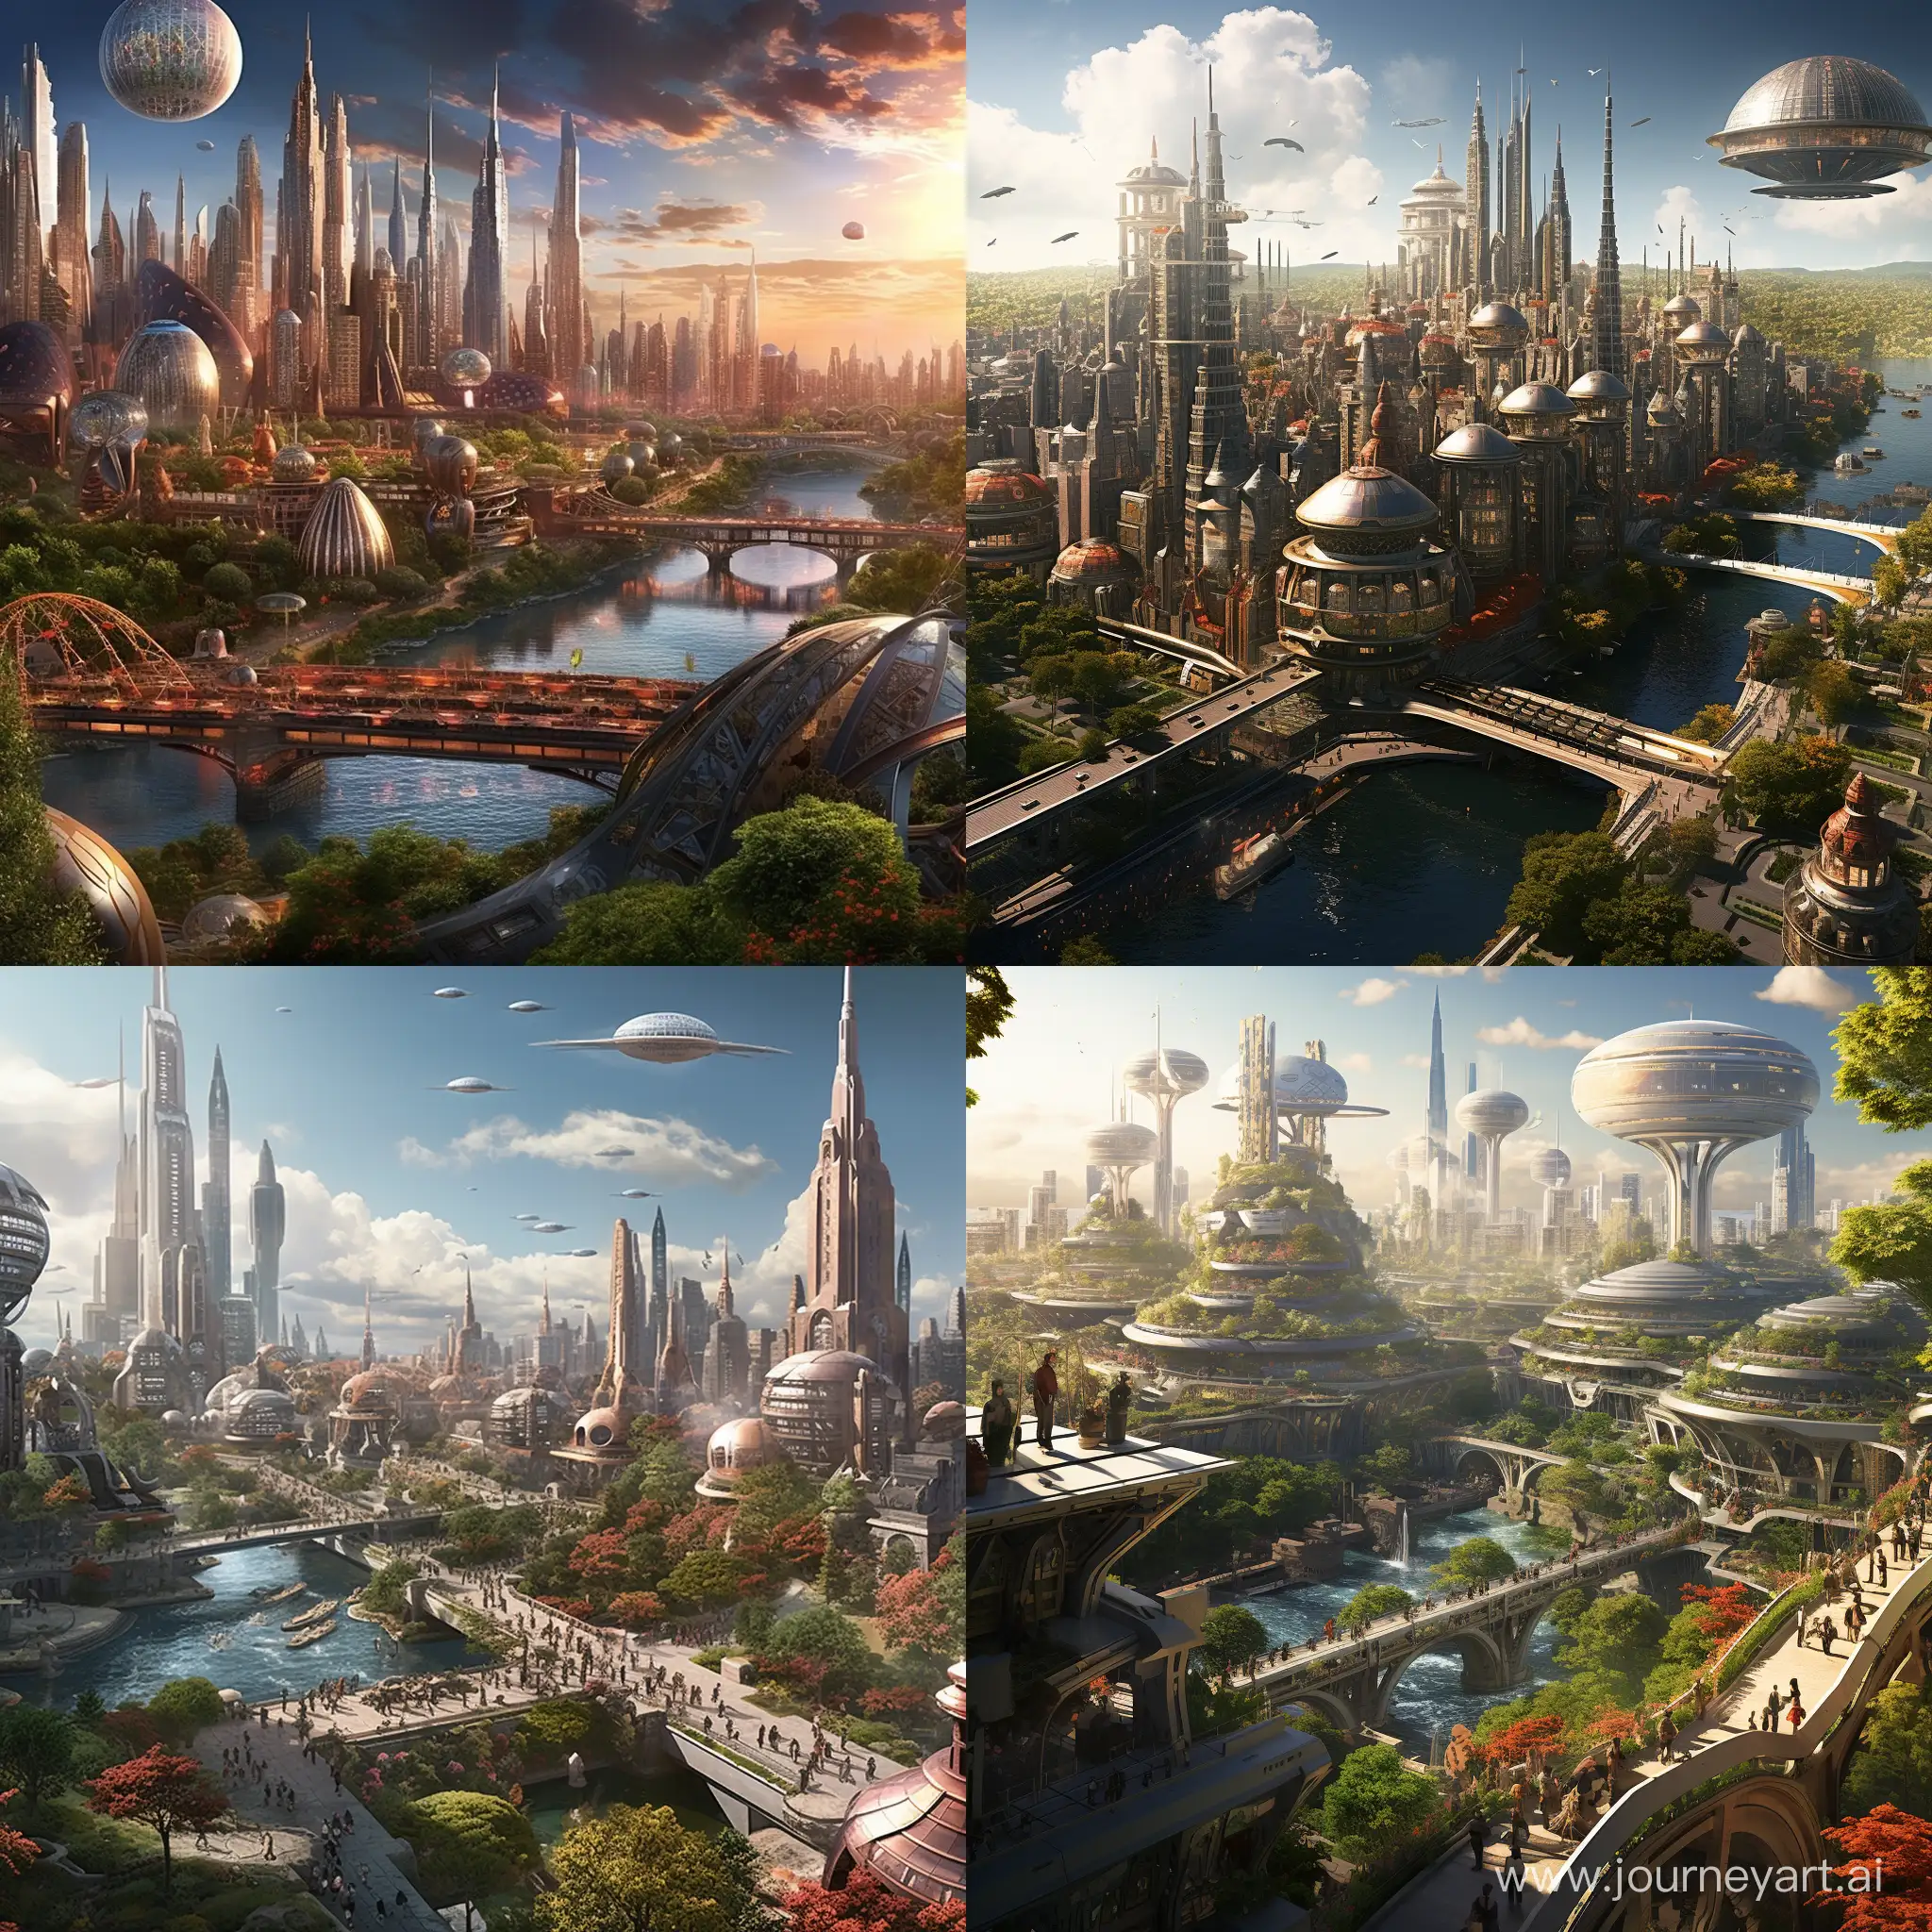 New York City in the year 2300